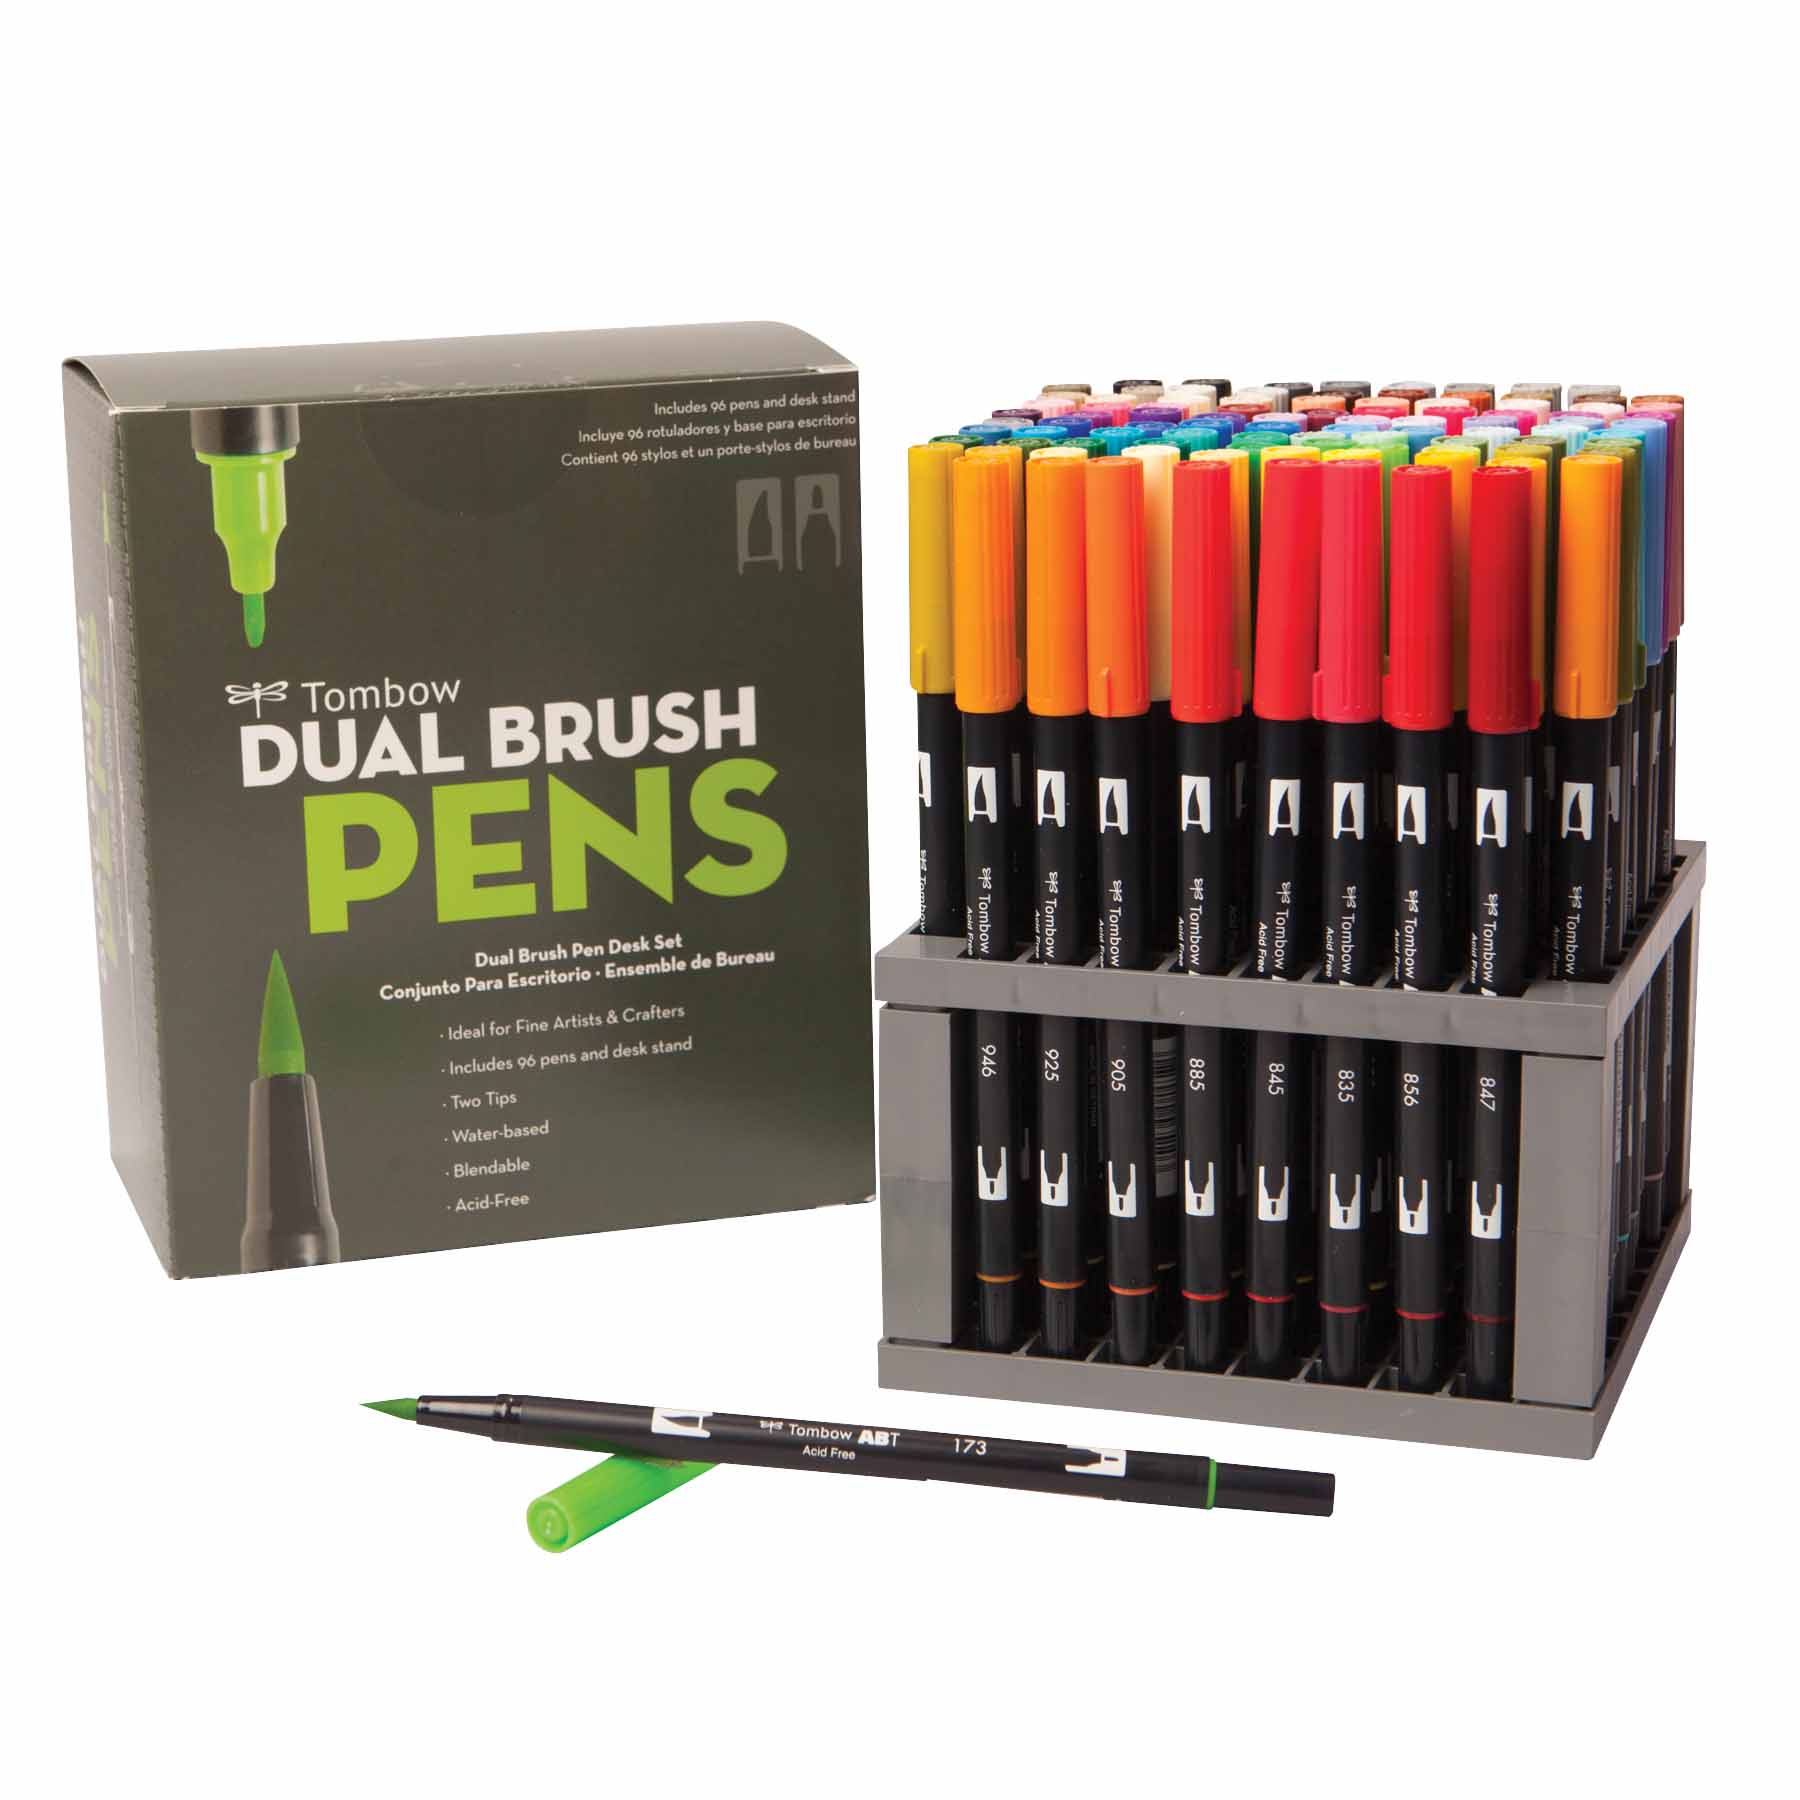 The complete collection of Tombow Dual Brush pens along with stand.